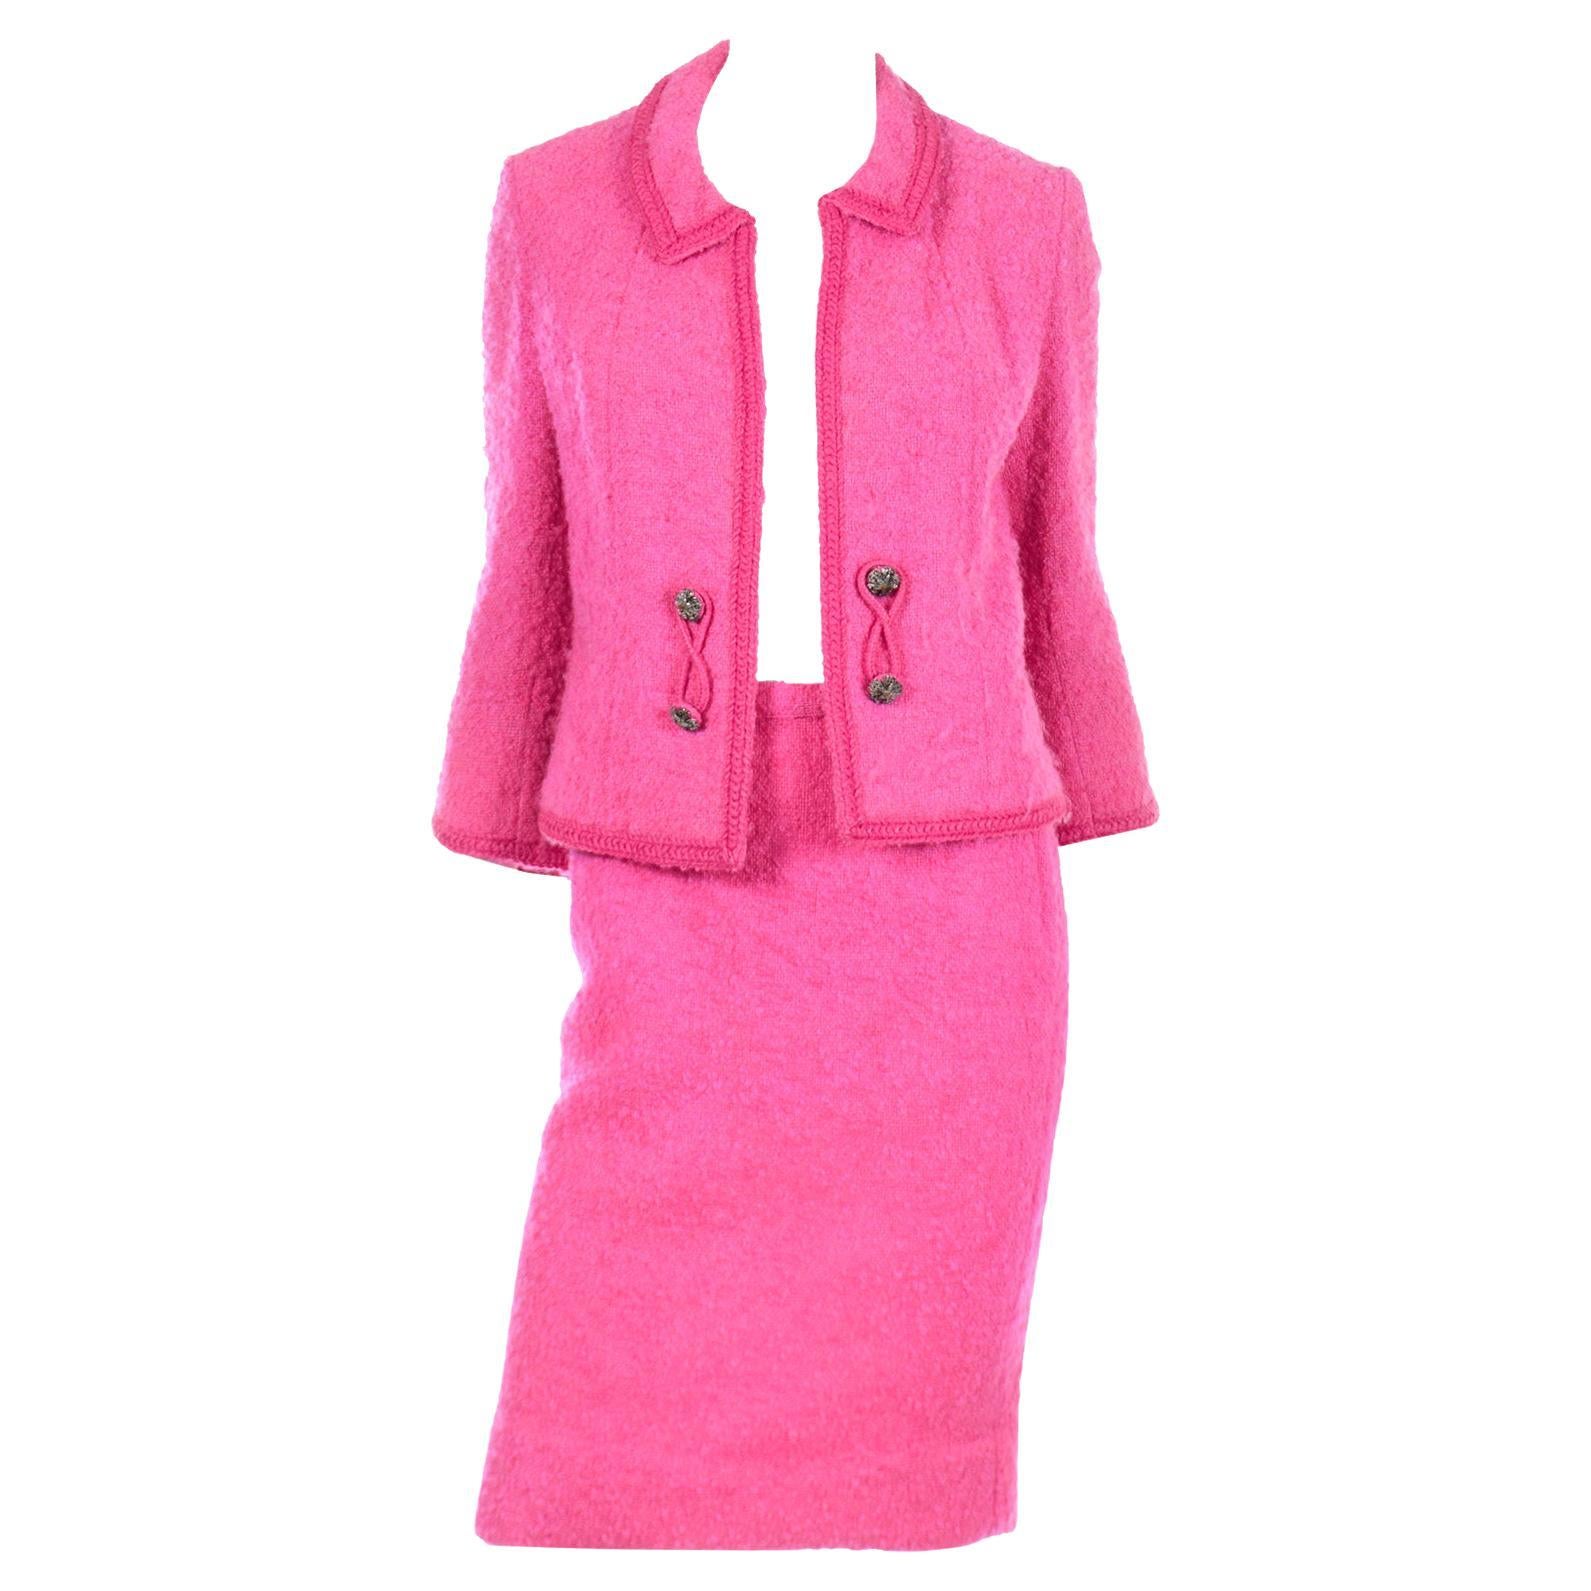 Lilli Ann Vintage 1960s Hot Pink Wool Boucle Jacket W Chain Hem and Skirt Suit 